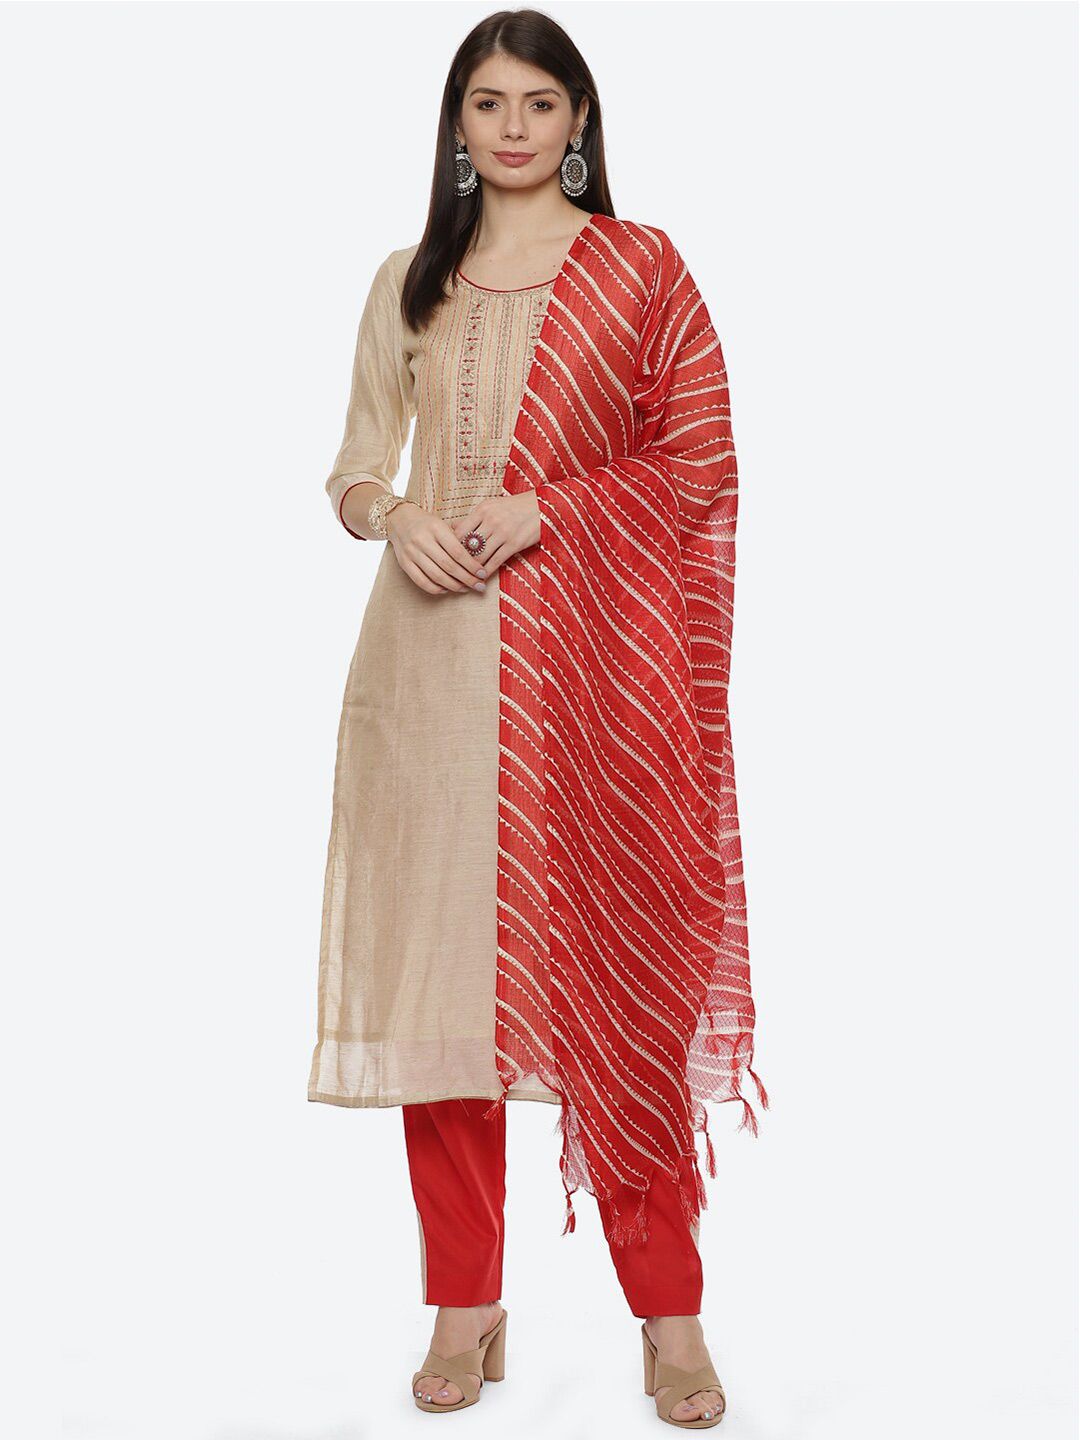 Biba Red & Beige Unstitched Dress Material Price in India